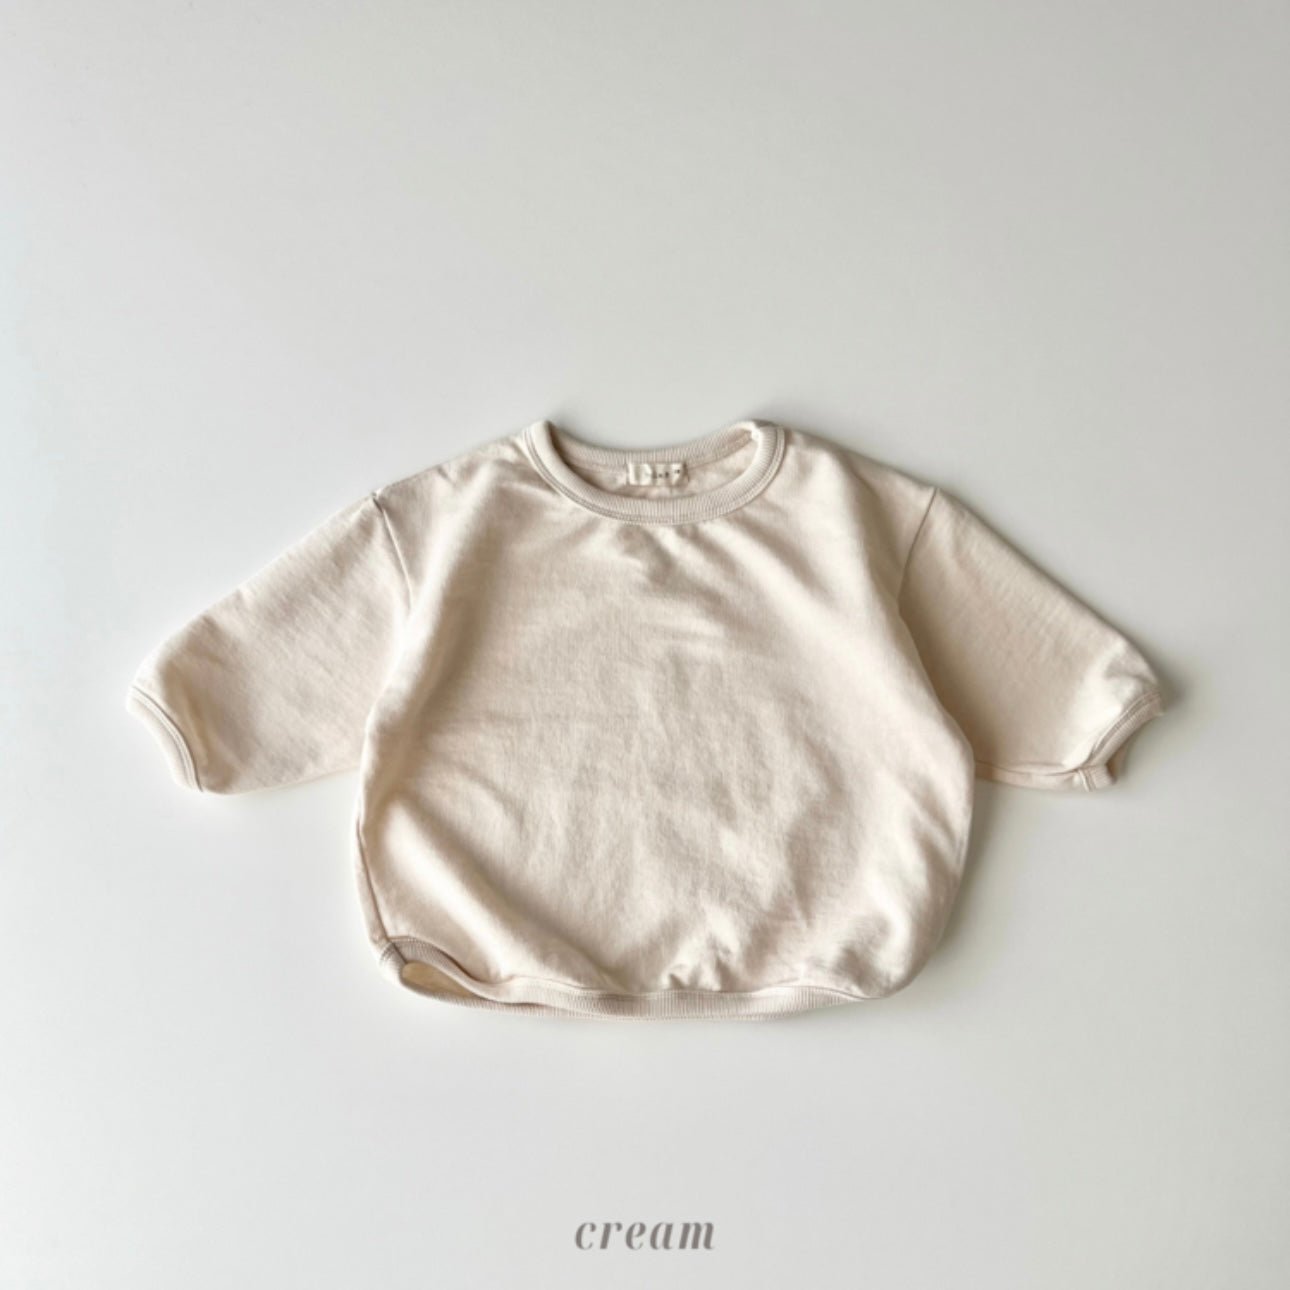 Bam Bam Tee - Cream find Stylish Fashion for Little People- at Little Foxx Concept Store